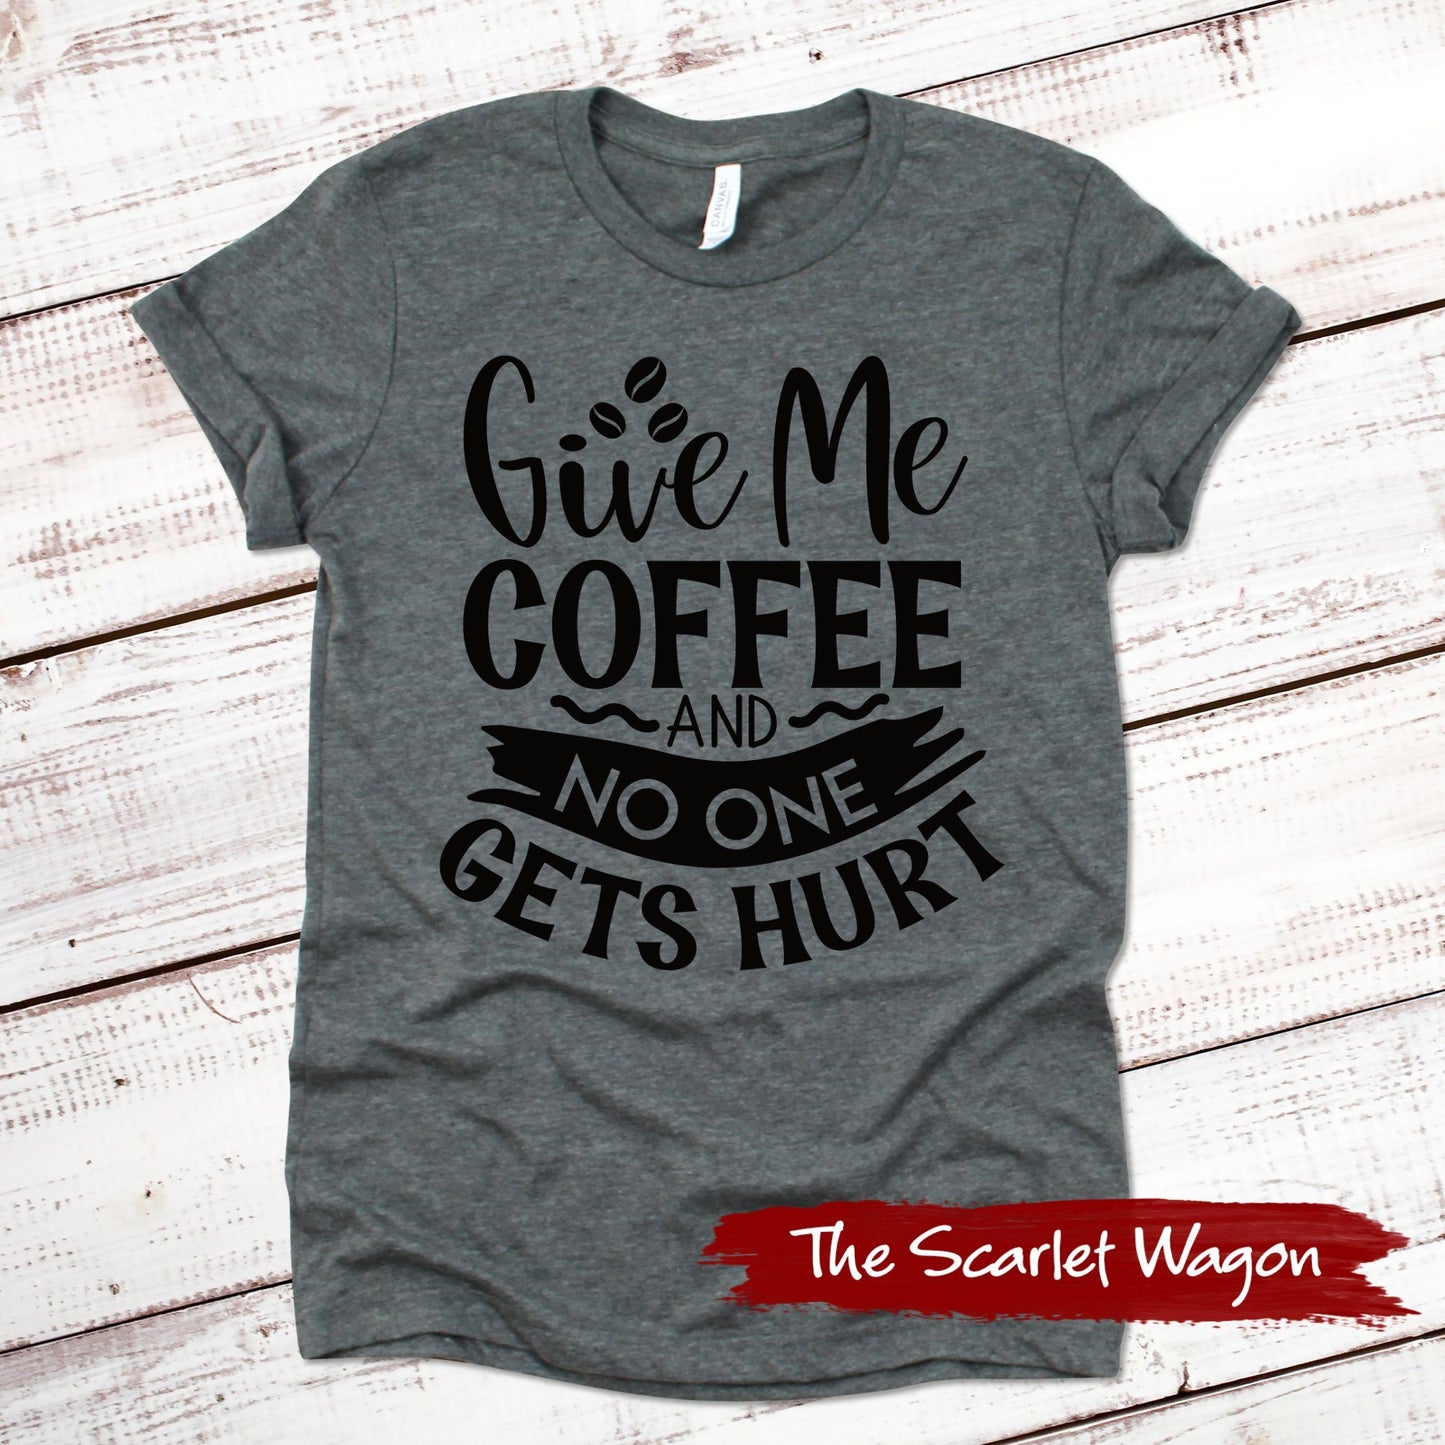 Give Me Coffee and No One Gets Hurt Funny Shirt Scarlet Wagon Deep Heather Gray XS 